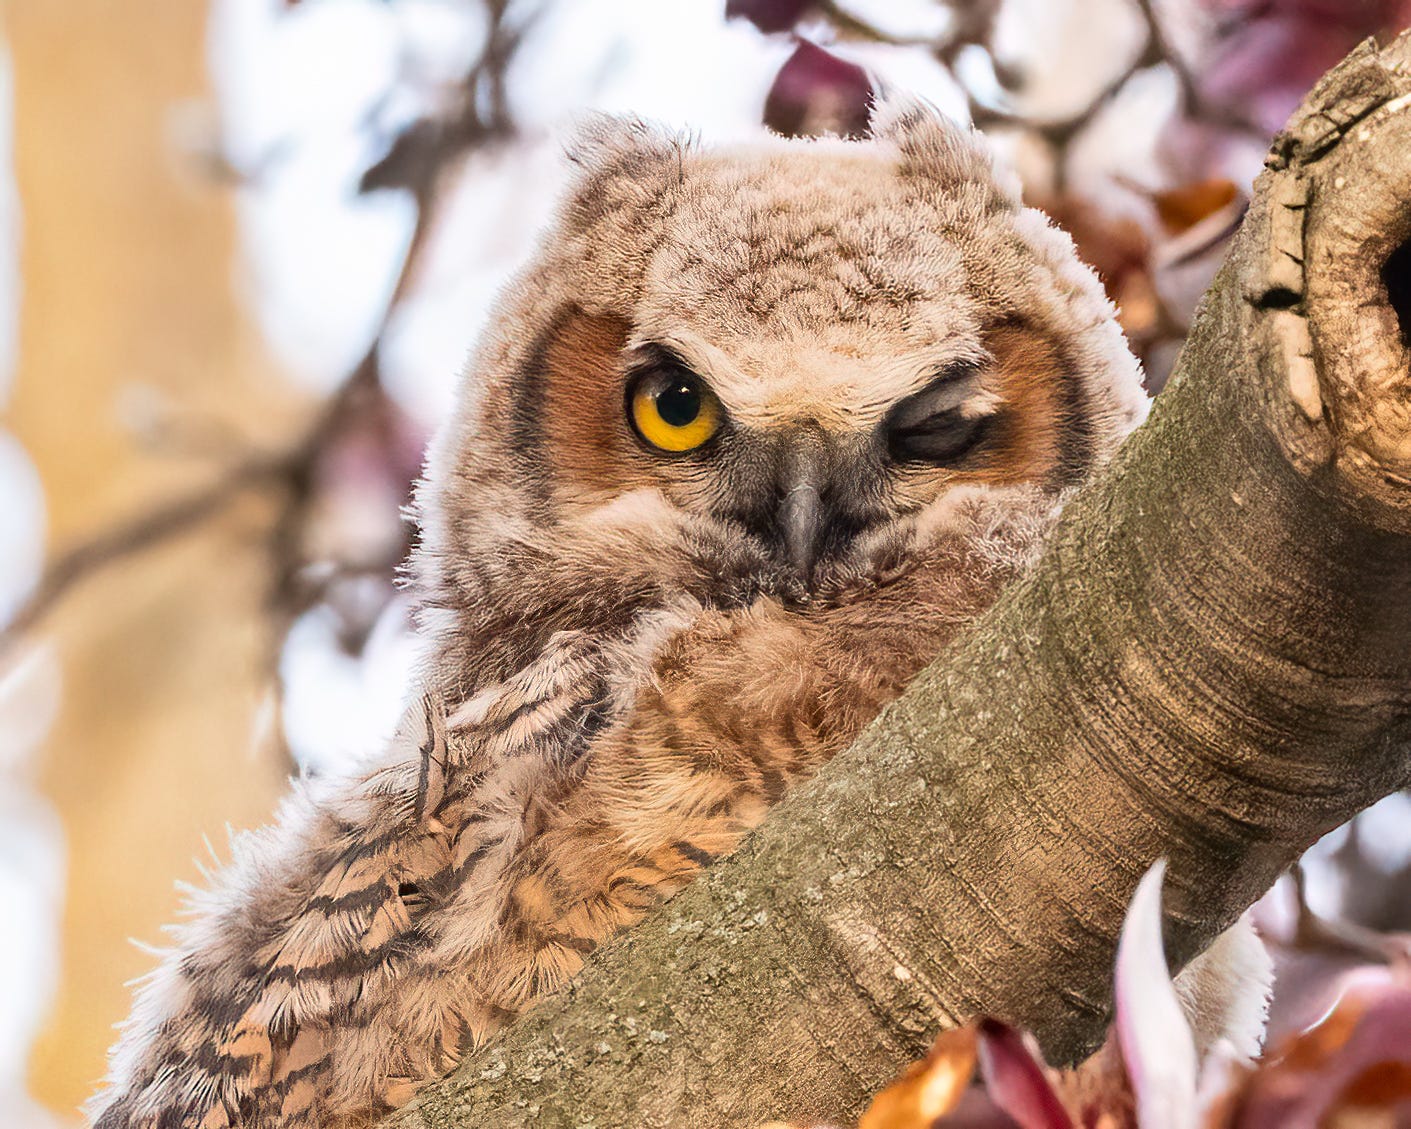 The owl is in a magnolia tree with faint pink flowers in the background. A large limb cuts across the front of the image. The owl sits on that branch and winks its left eye.